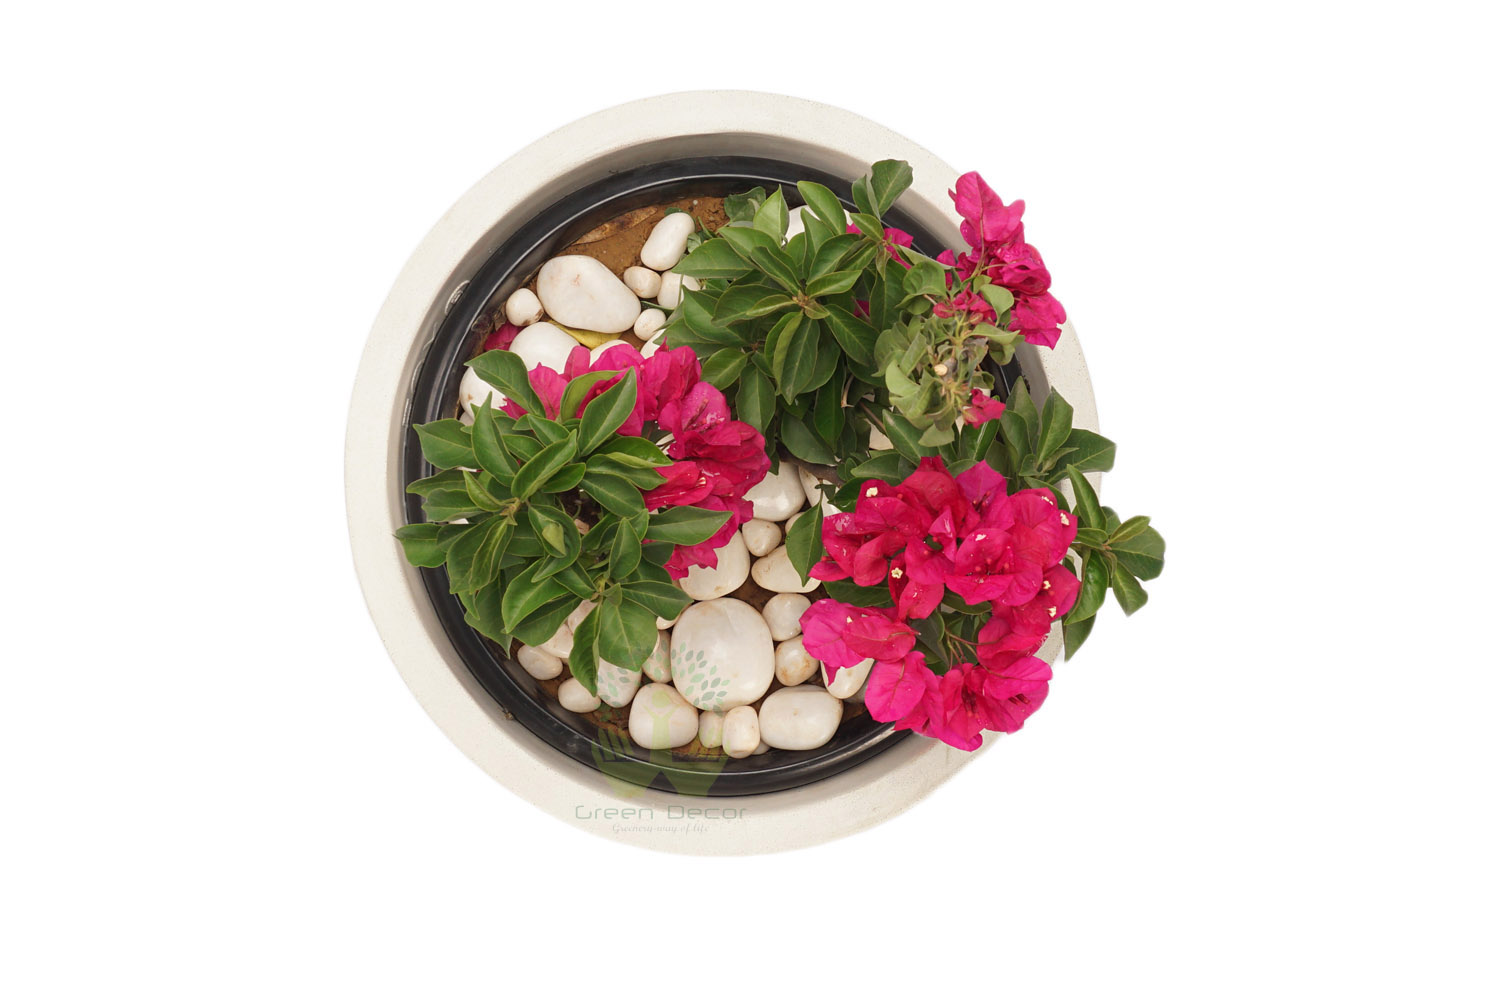 Buy Bougainvillea Plants , White Pots and seeds in Delhi NCR by the best online nursery shop Greendecor.